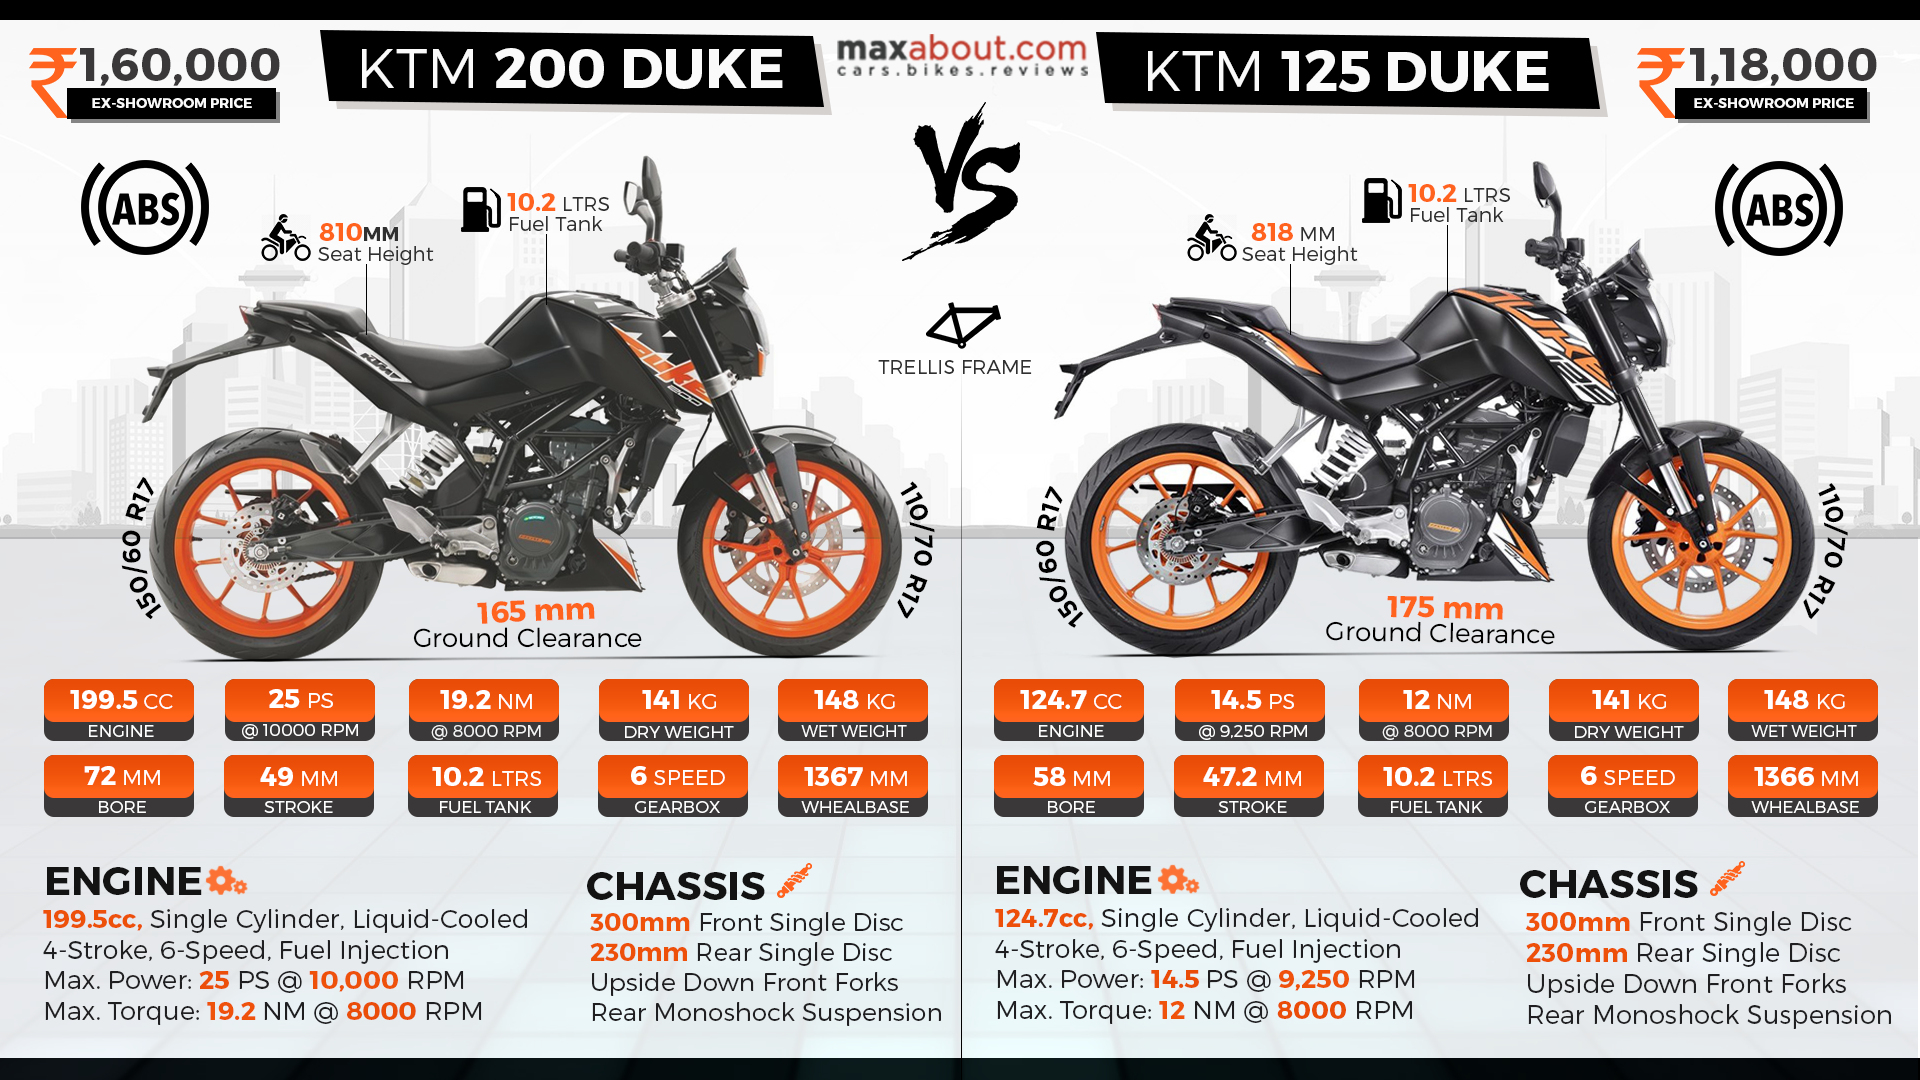 KTM Duke 125 | The all-new KTM Duke 125 has received a major cosmetic  makeover. So in this review, we tell you all about what's new on the 2021 KTM  Duke 125